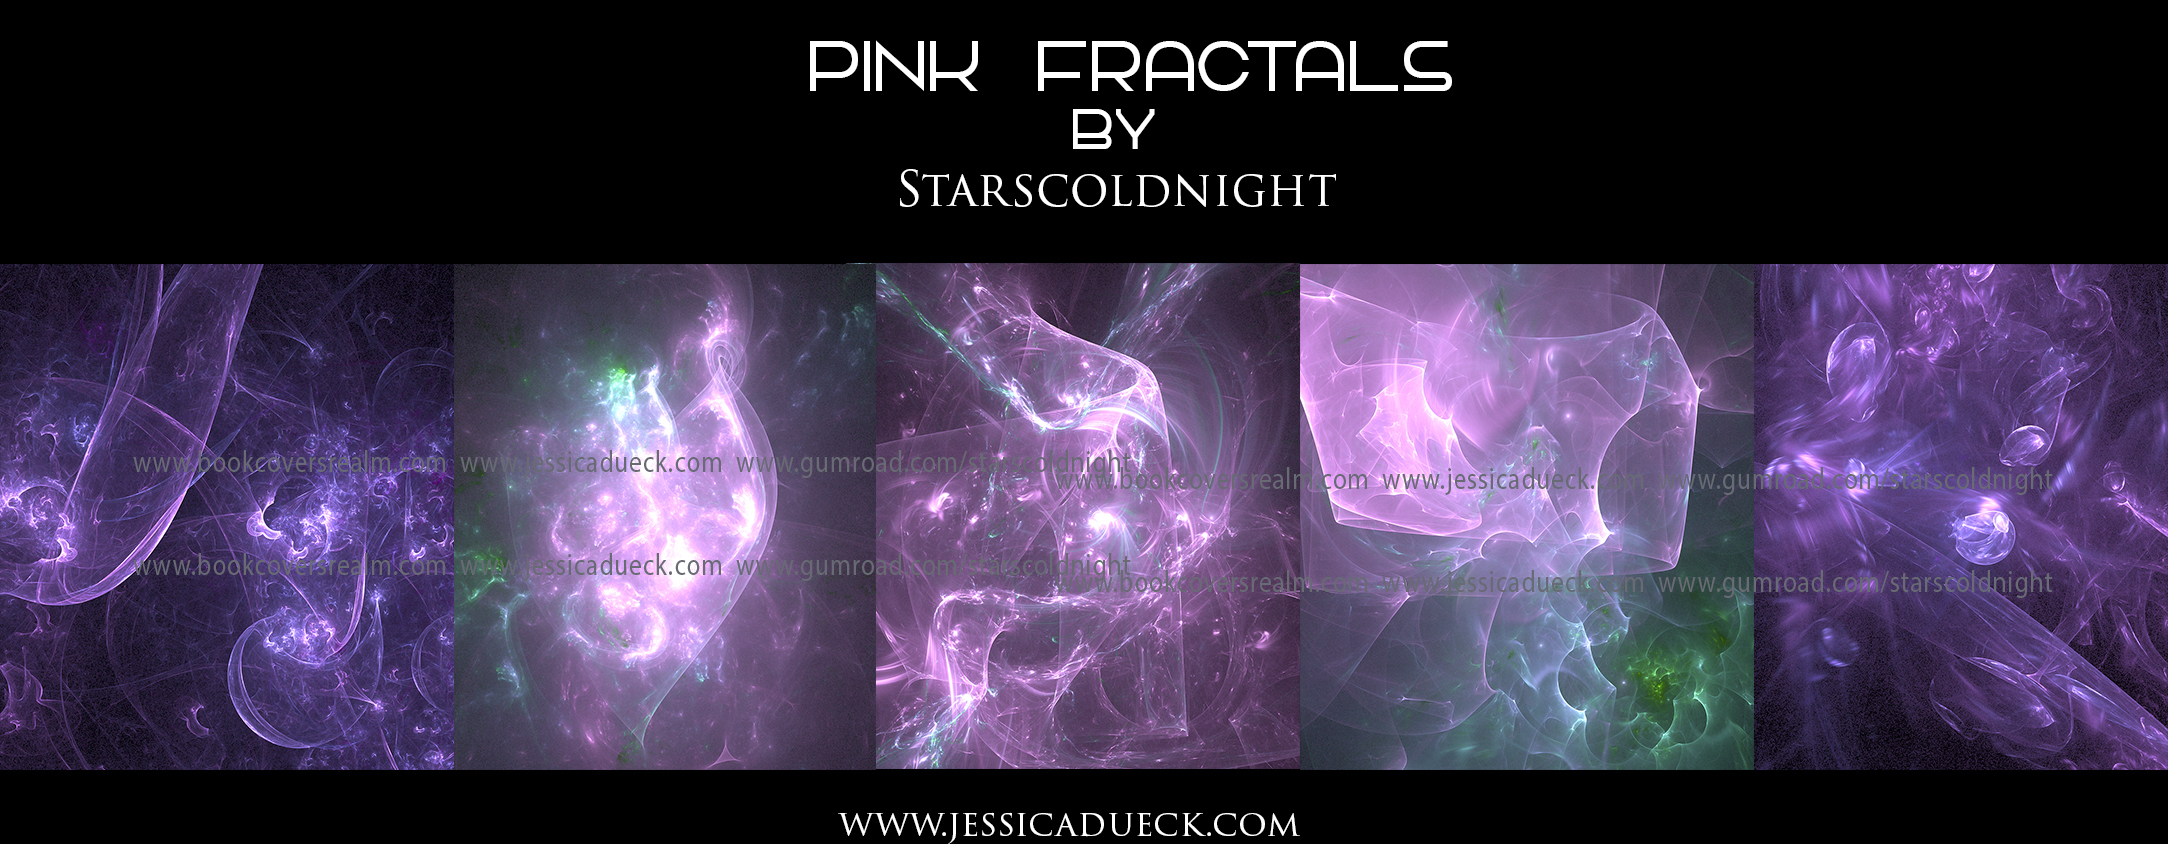 pink fractal by starscoldnight